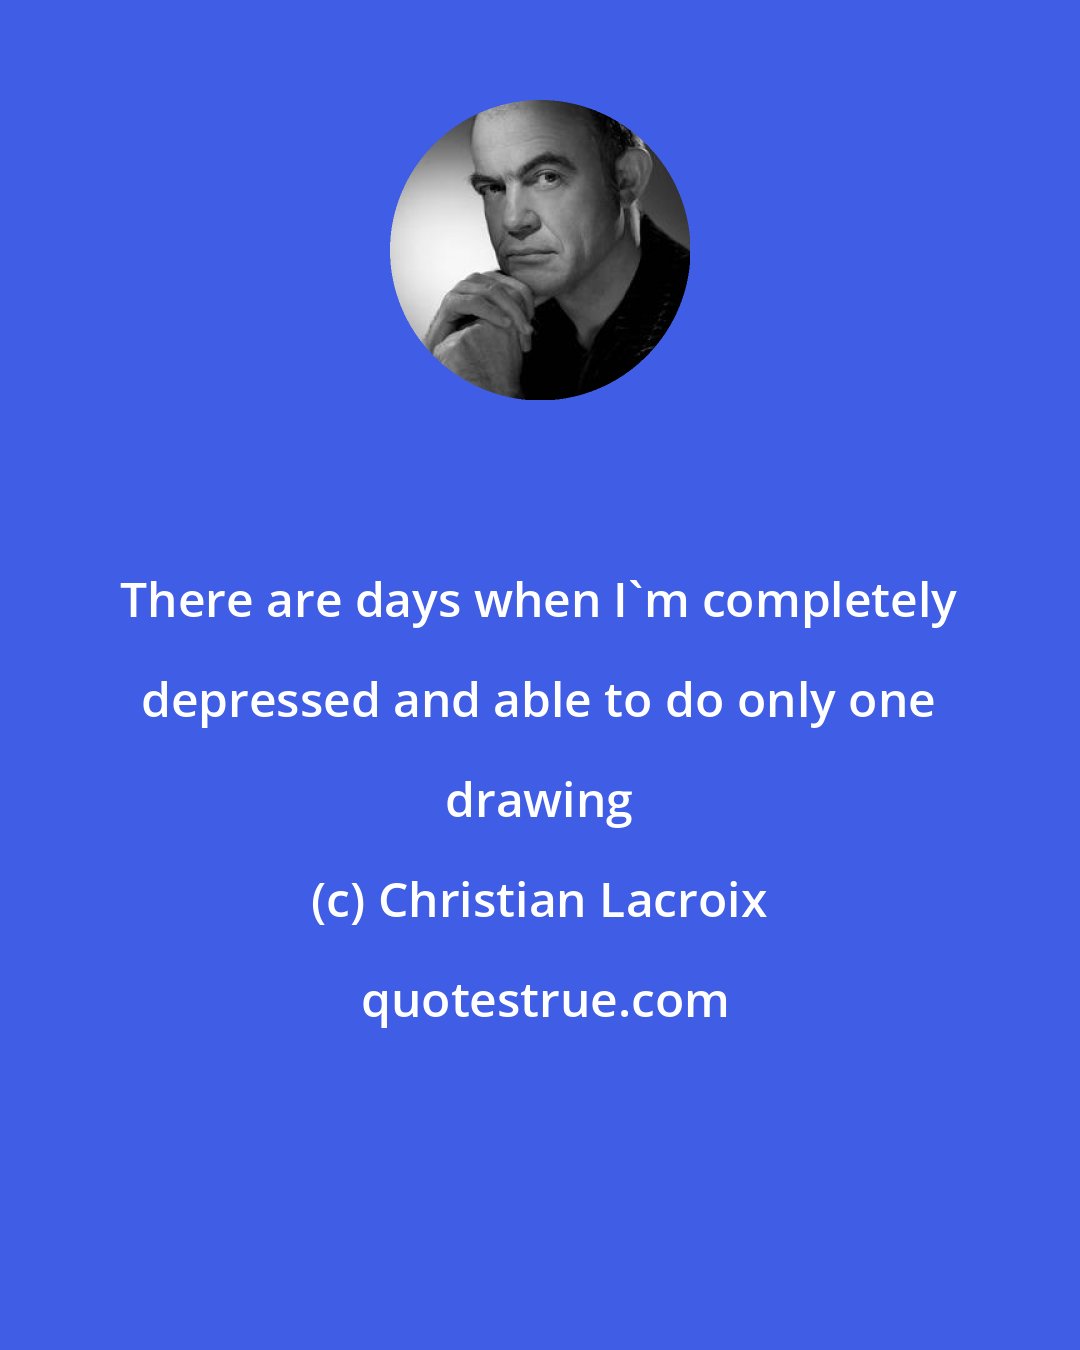 Christian Lacroix: There are days when I'm completely depressed and able to do only one drawing